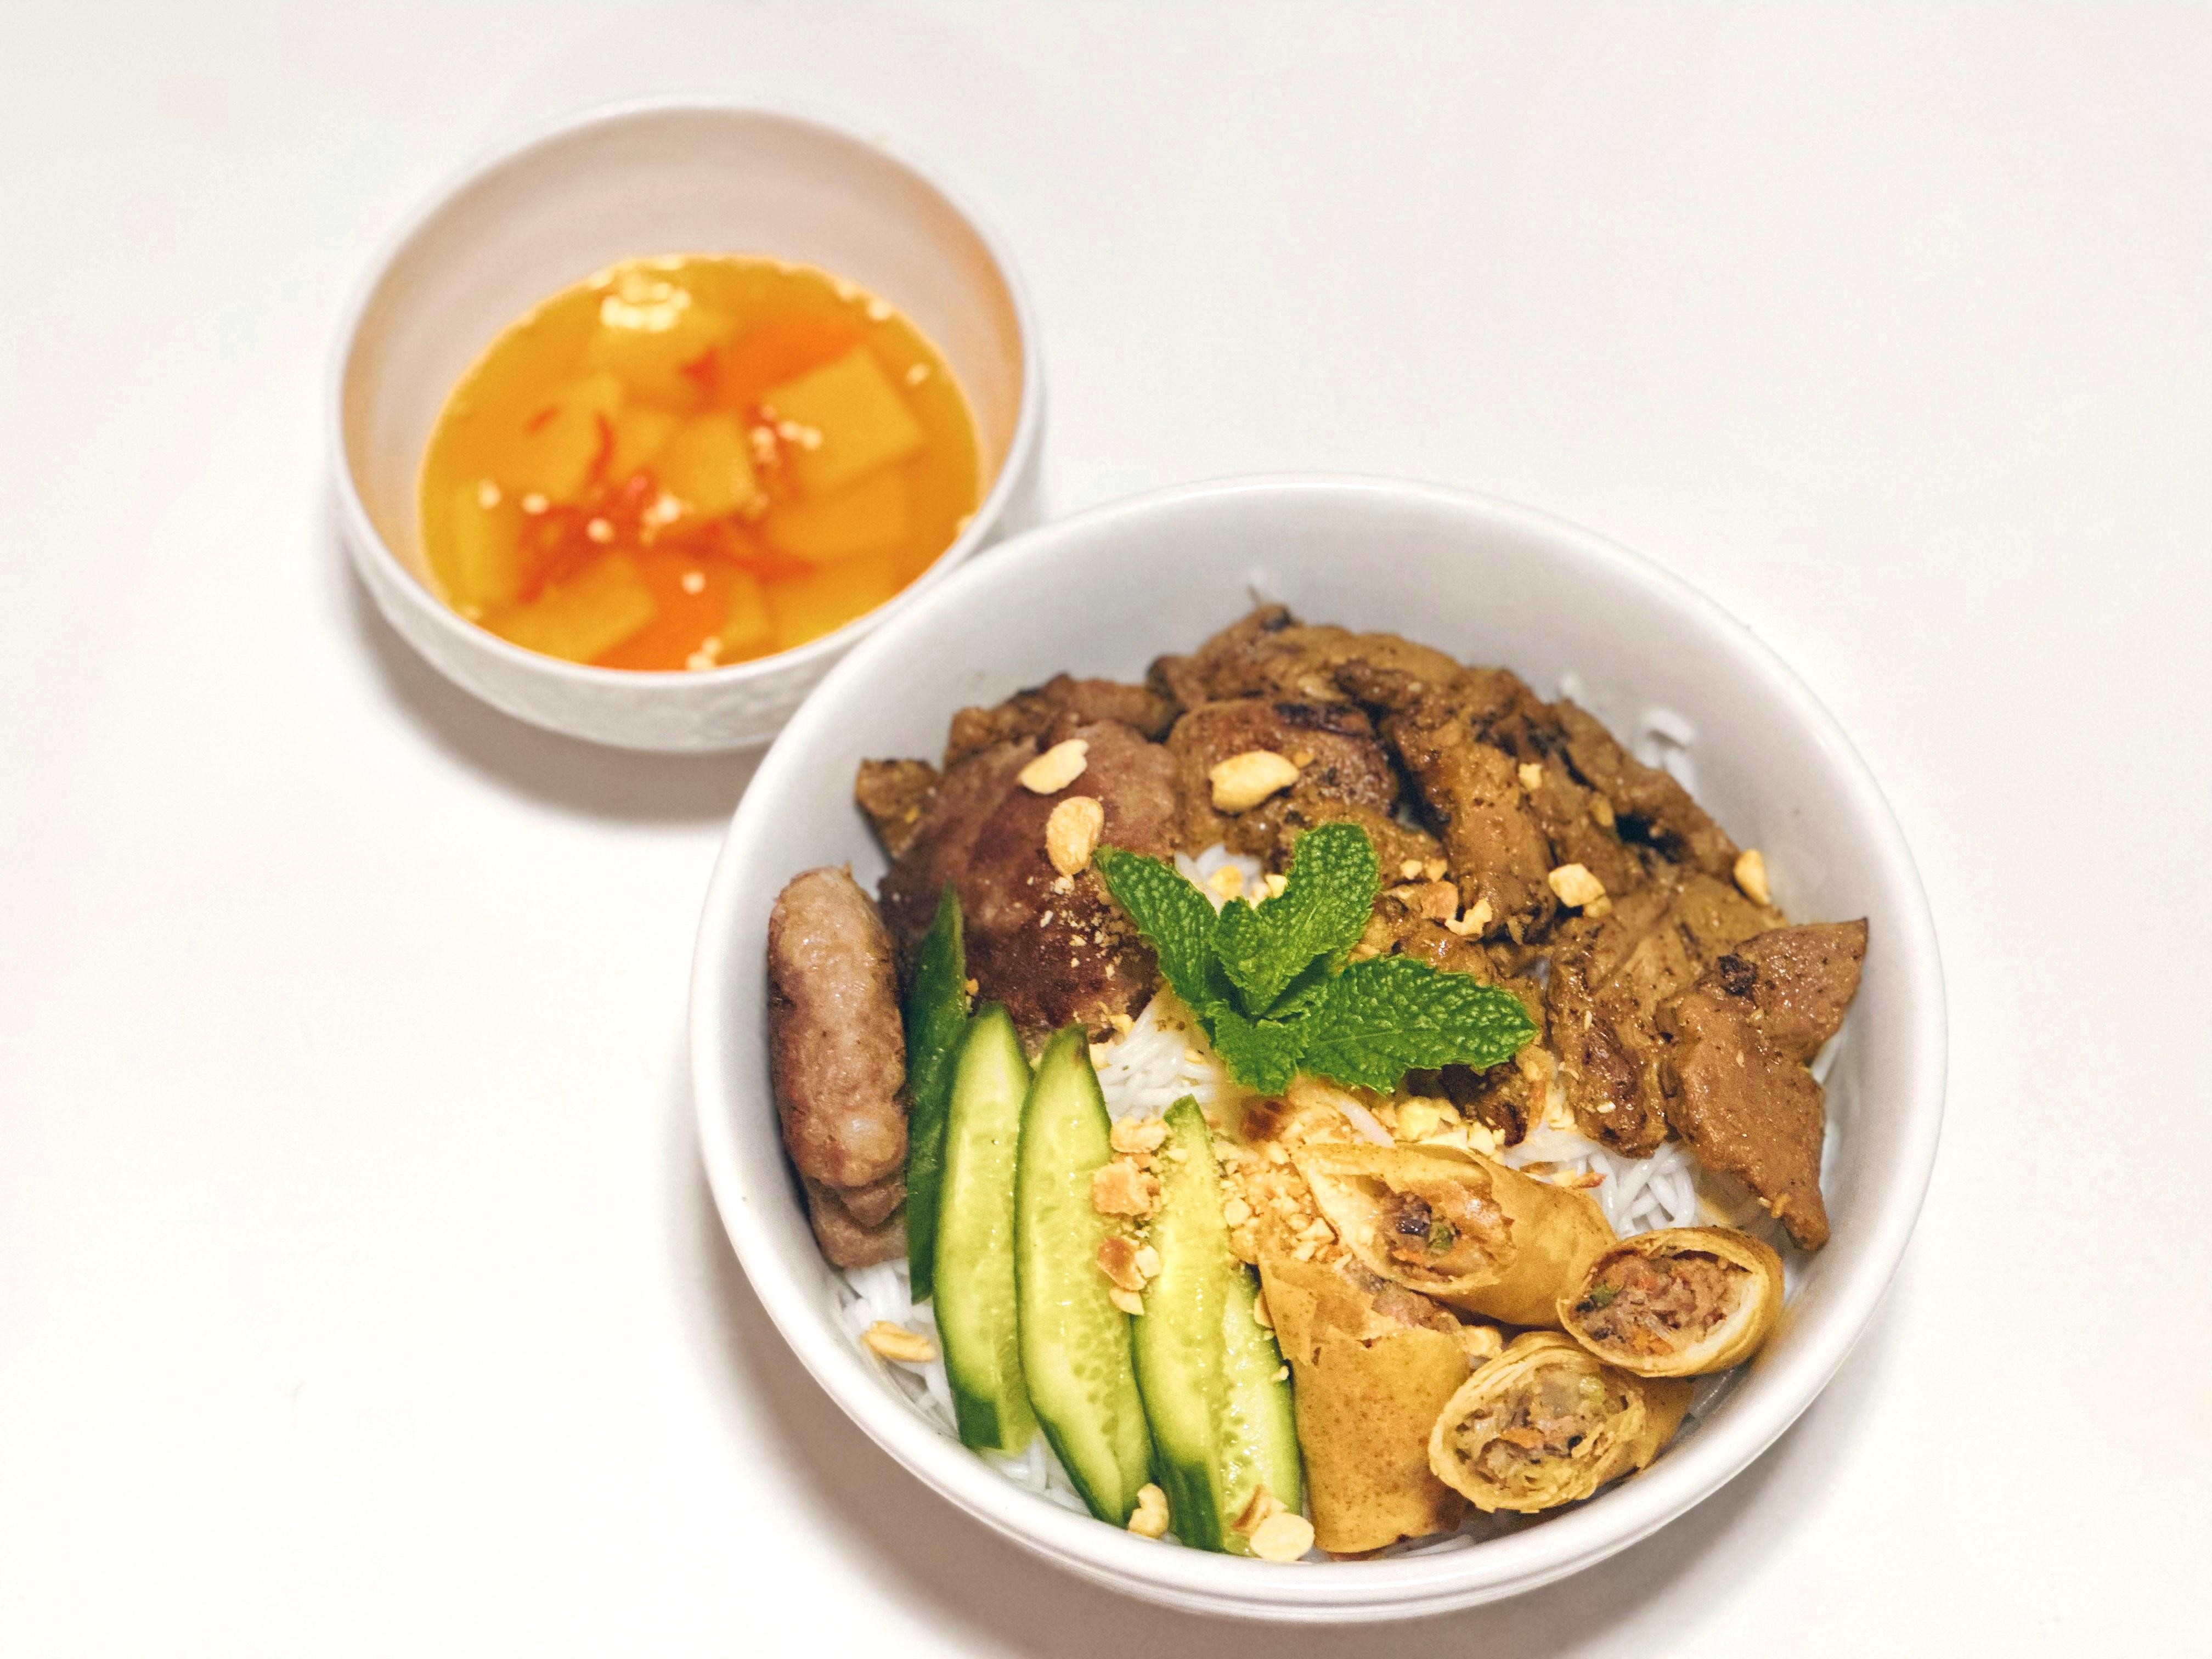 40. Grill pork and egg roll vermicelli